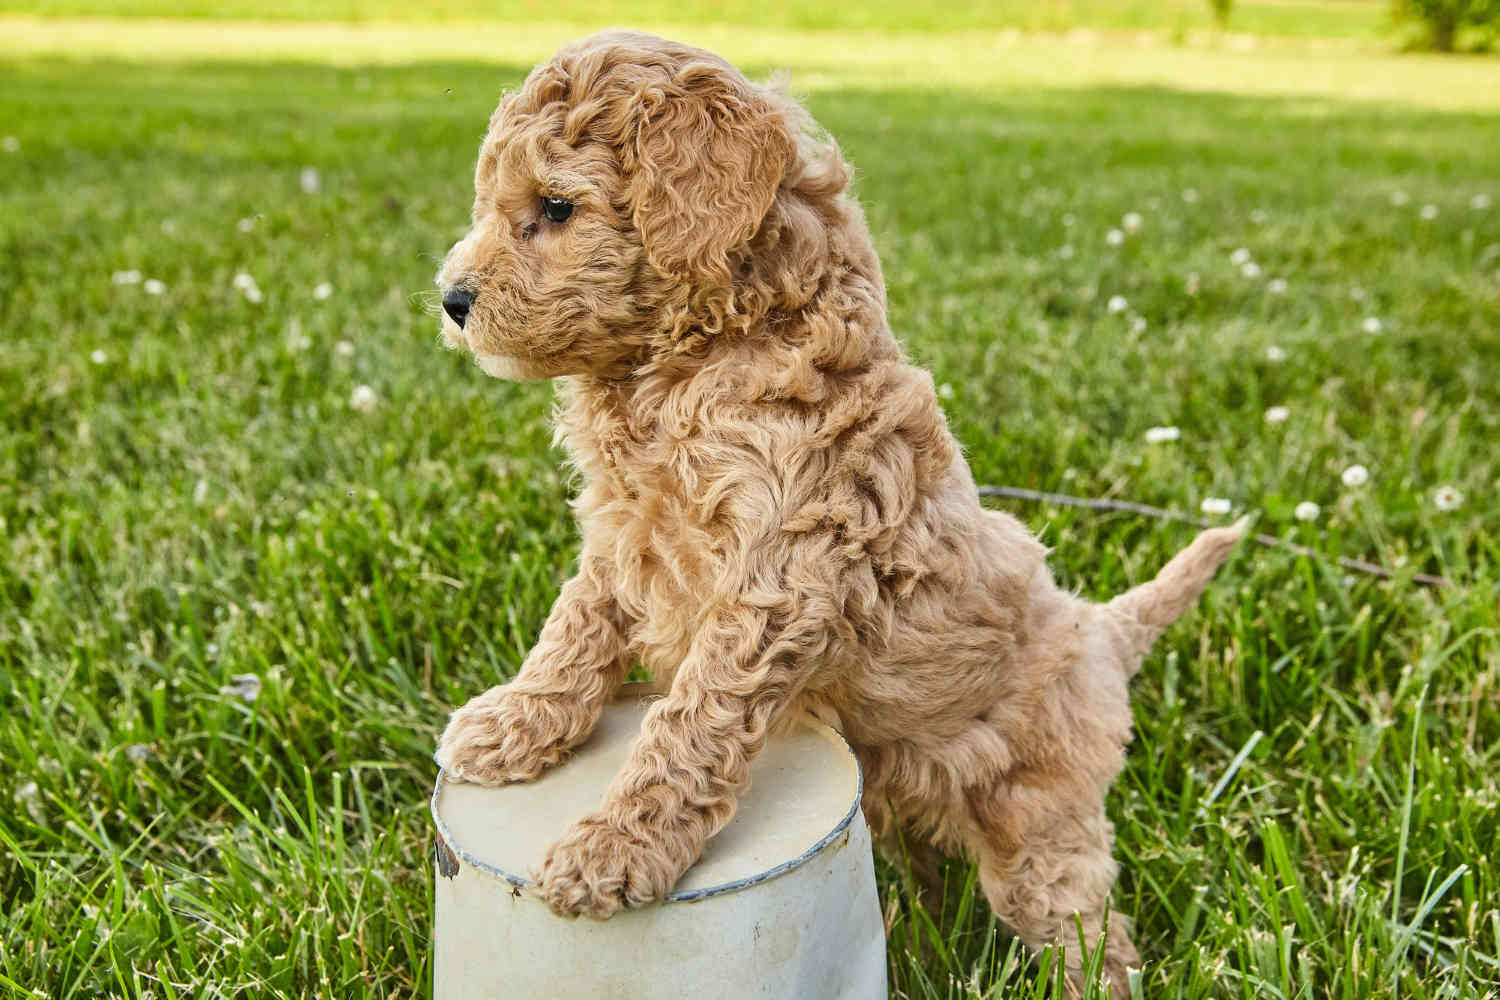 Goldendoodles as Office Companions: A Guide to Pet-Friendly Workspaces